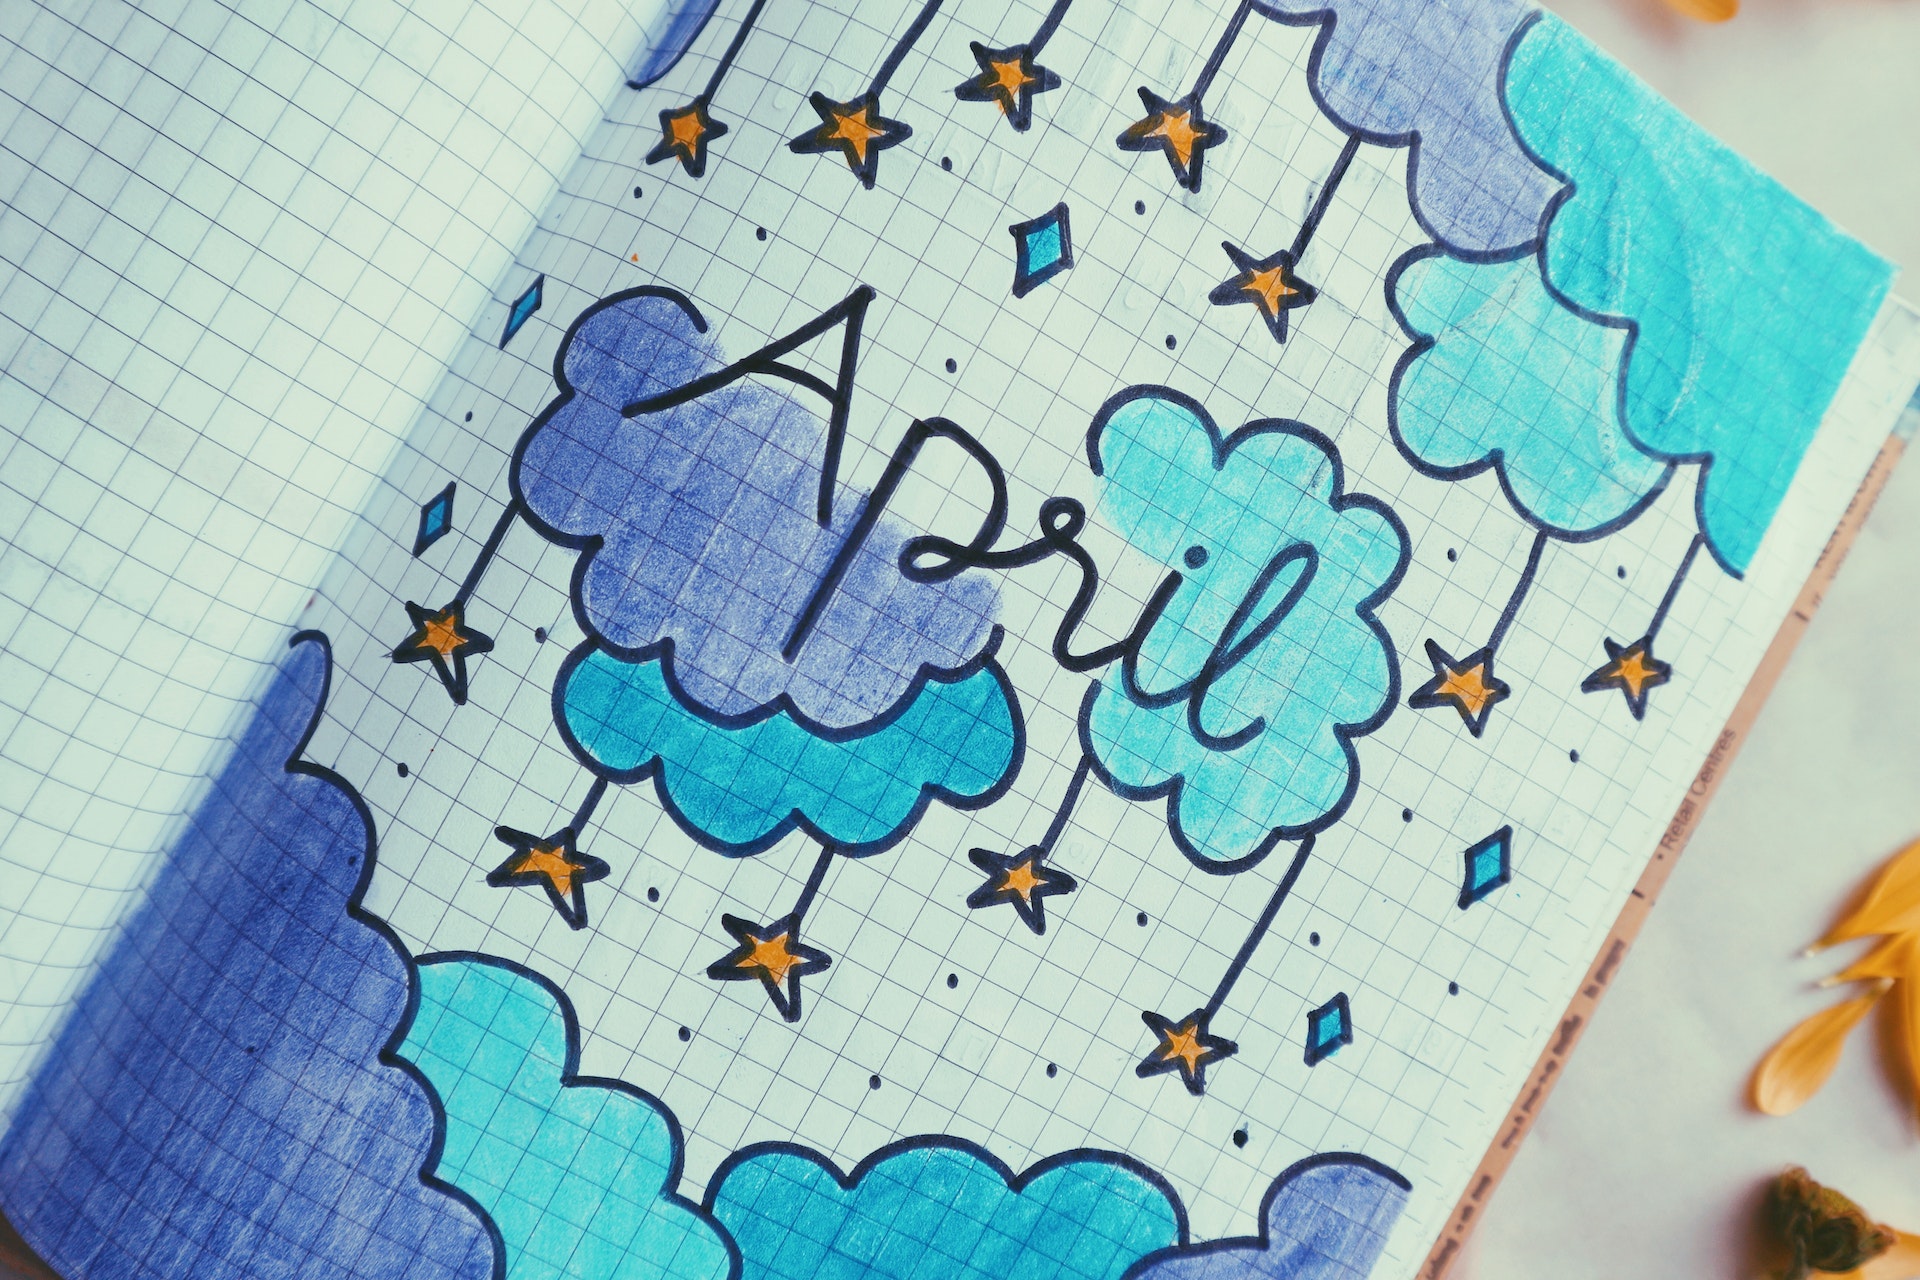 A notebook with the word April written on it in nice lettering.